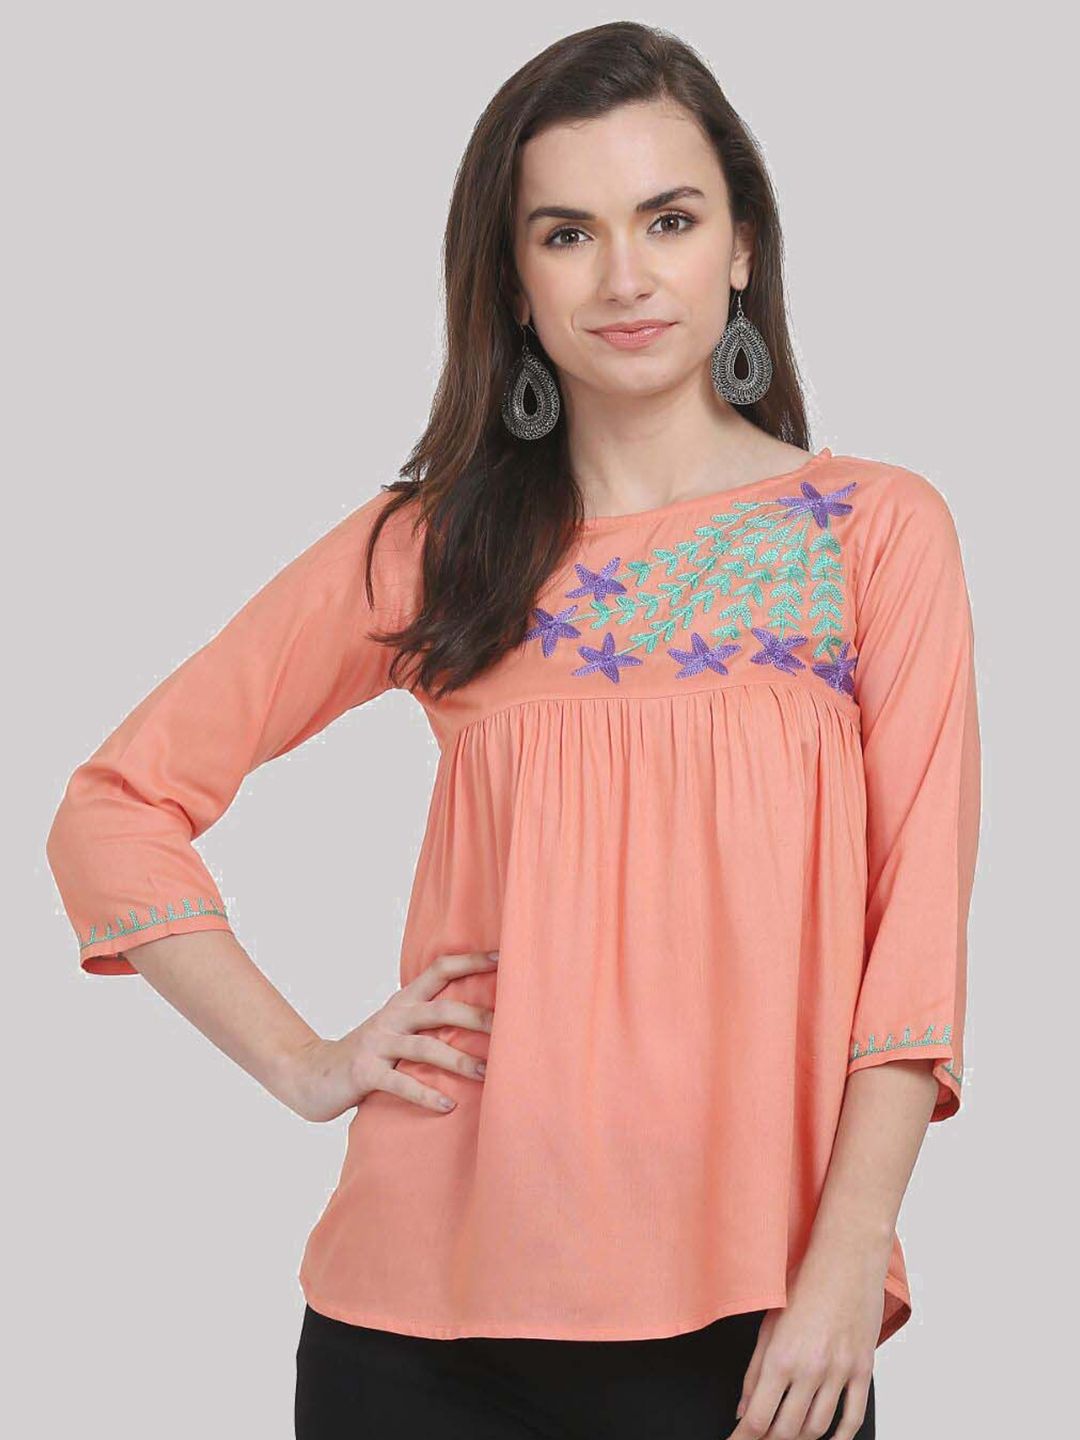 SAAKAA Orange & Blue Floral Embroidered Top Price in India